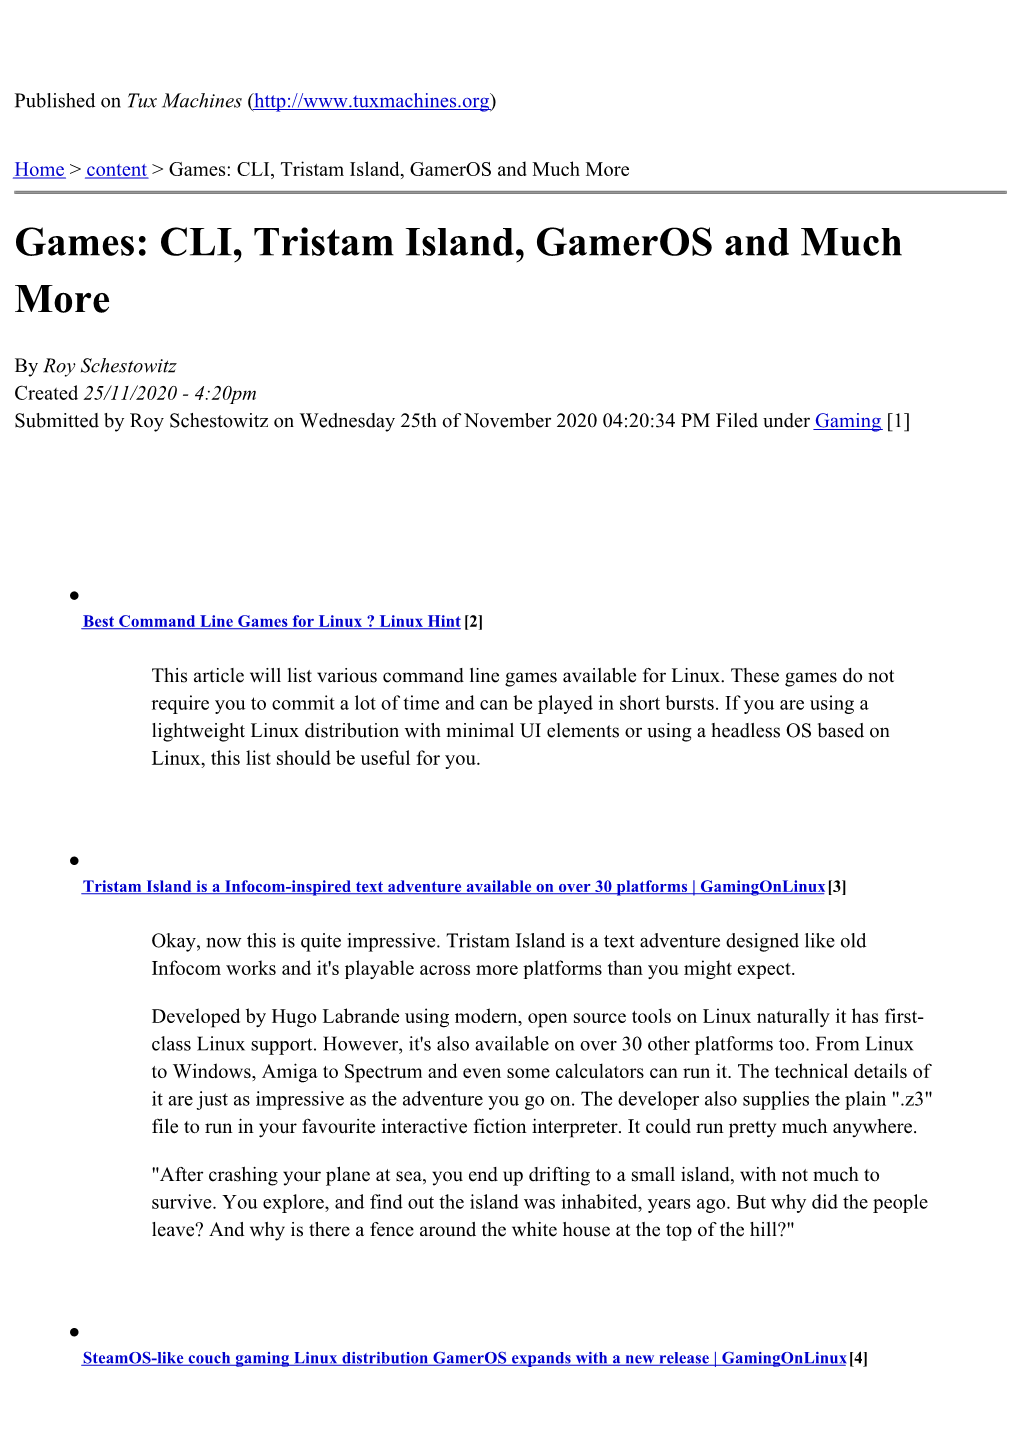 Games: CLI, Tristam Island, Gameros and Much More